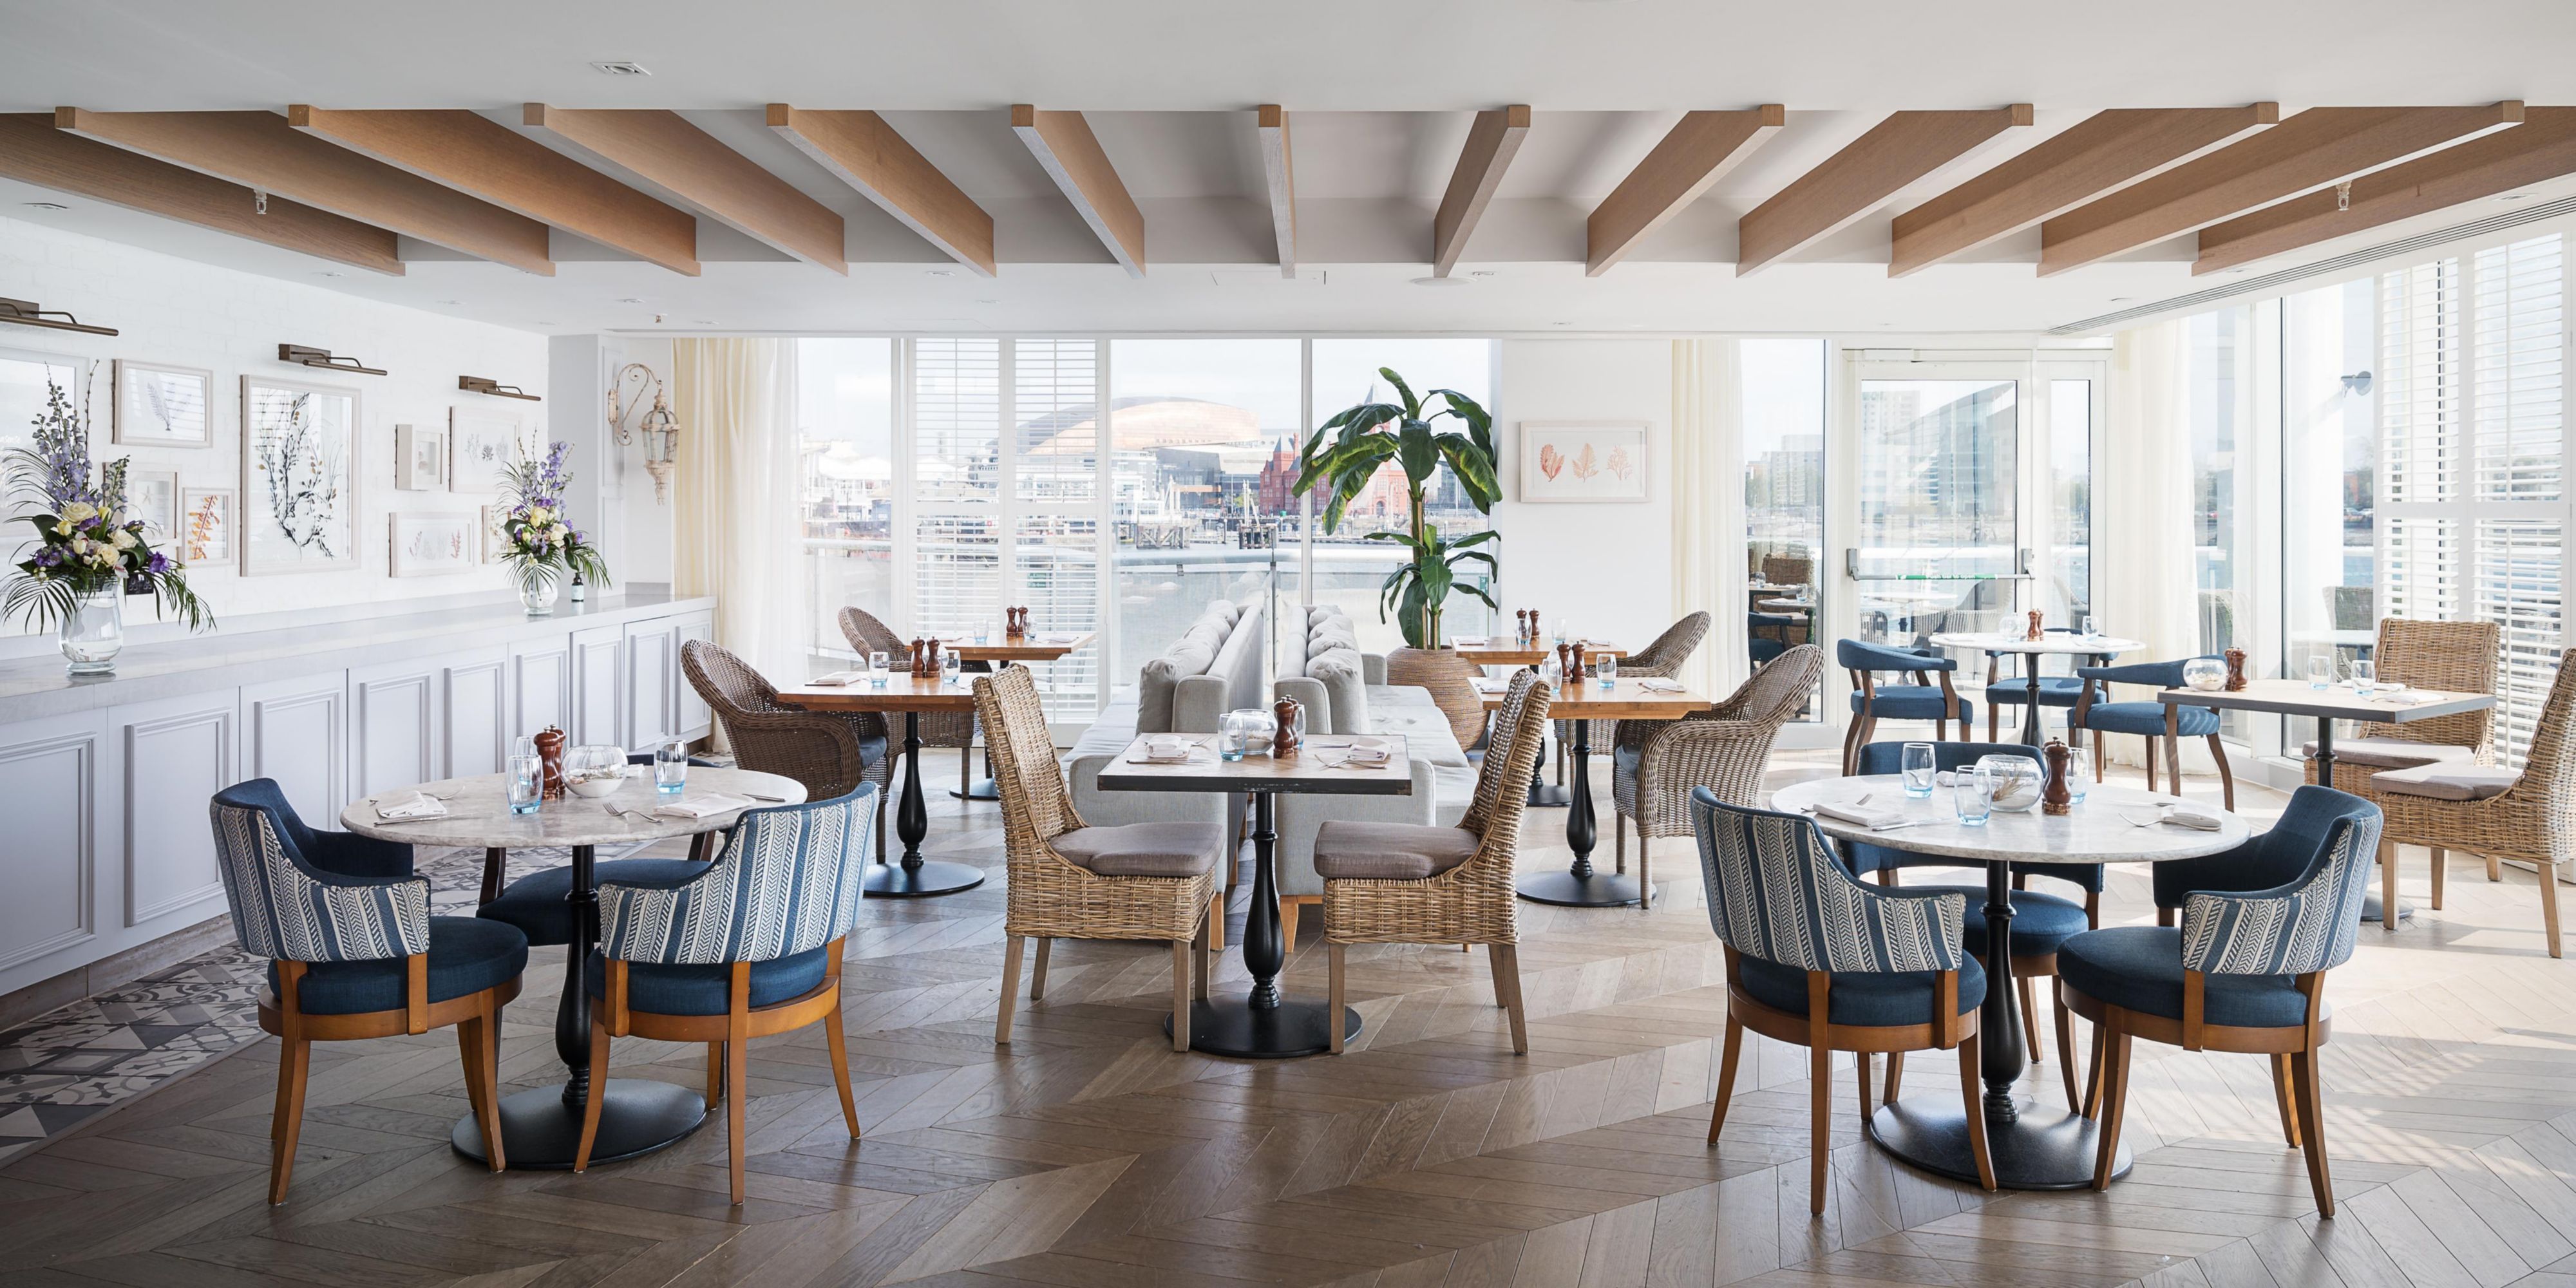 Tir a Môr, meaning land and sea in Welsh, our restaurant and bar, Tir a Môr, takes its cue from our bayside location and the very best produce Wales has to offer.
